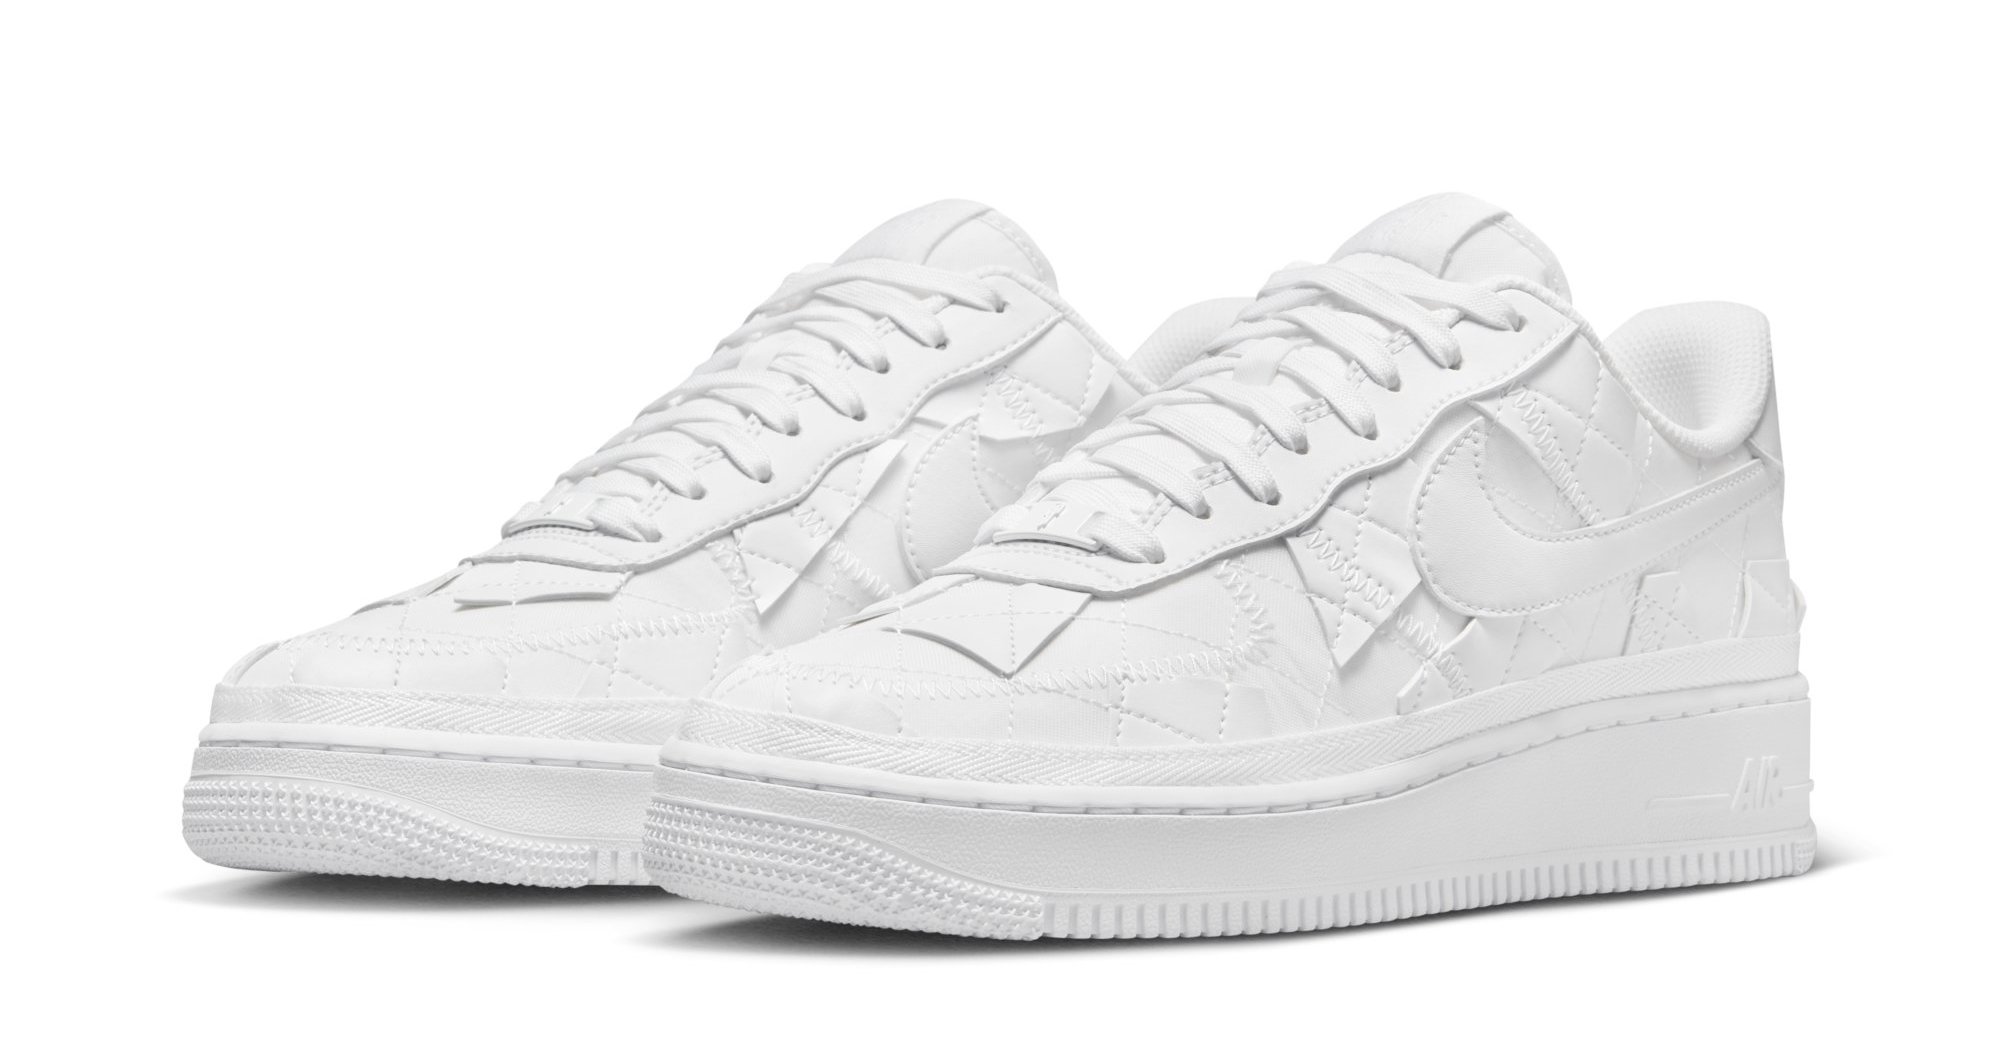 White on White Billie Eilish x Nike Air Force 1 Low Releases This